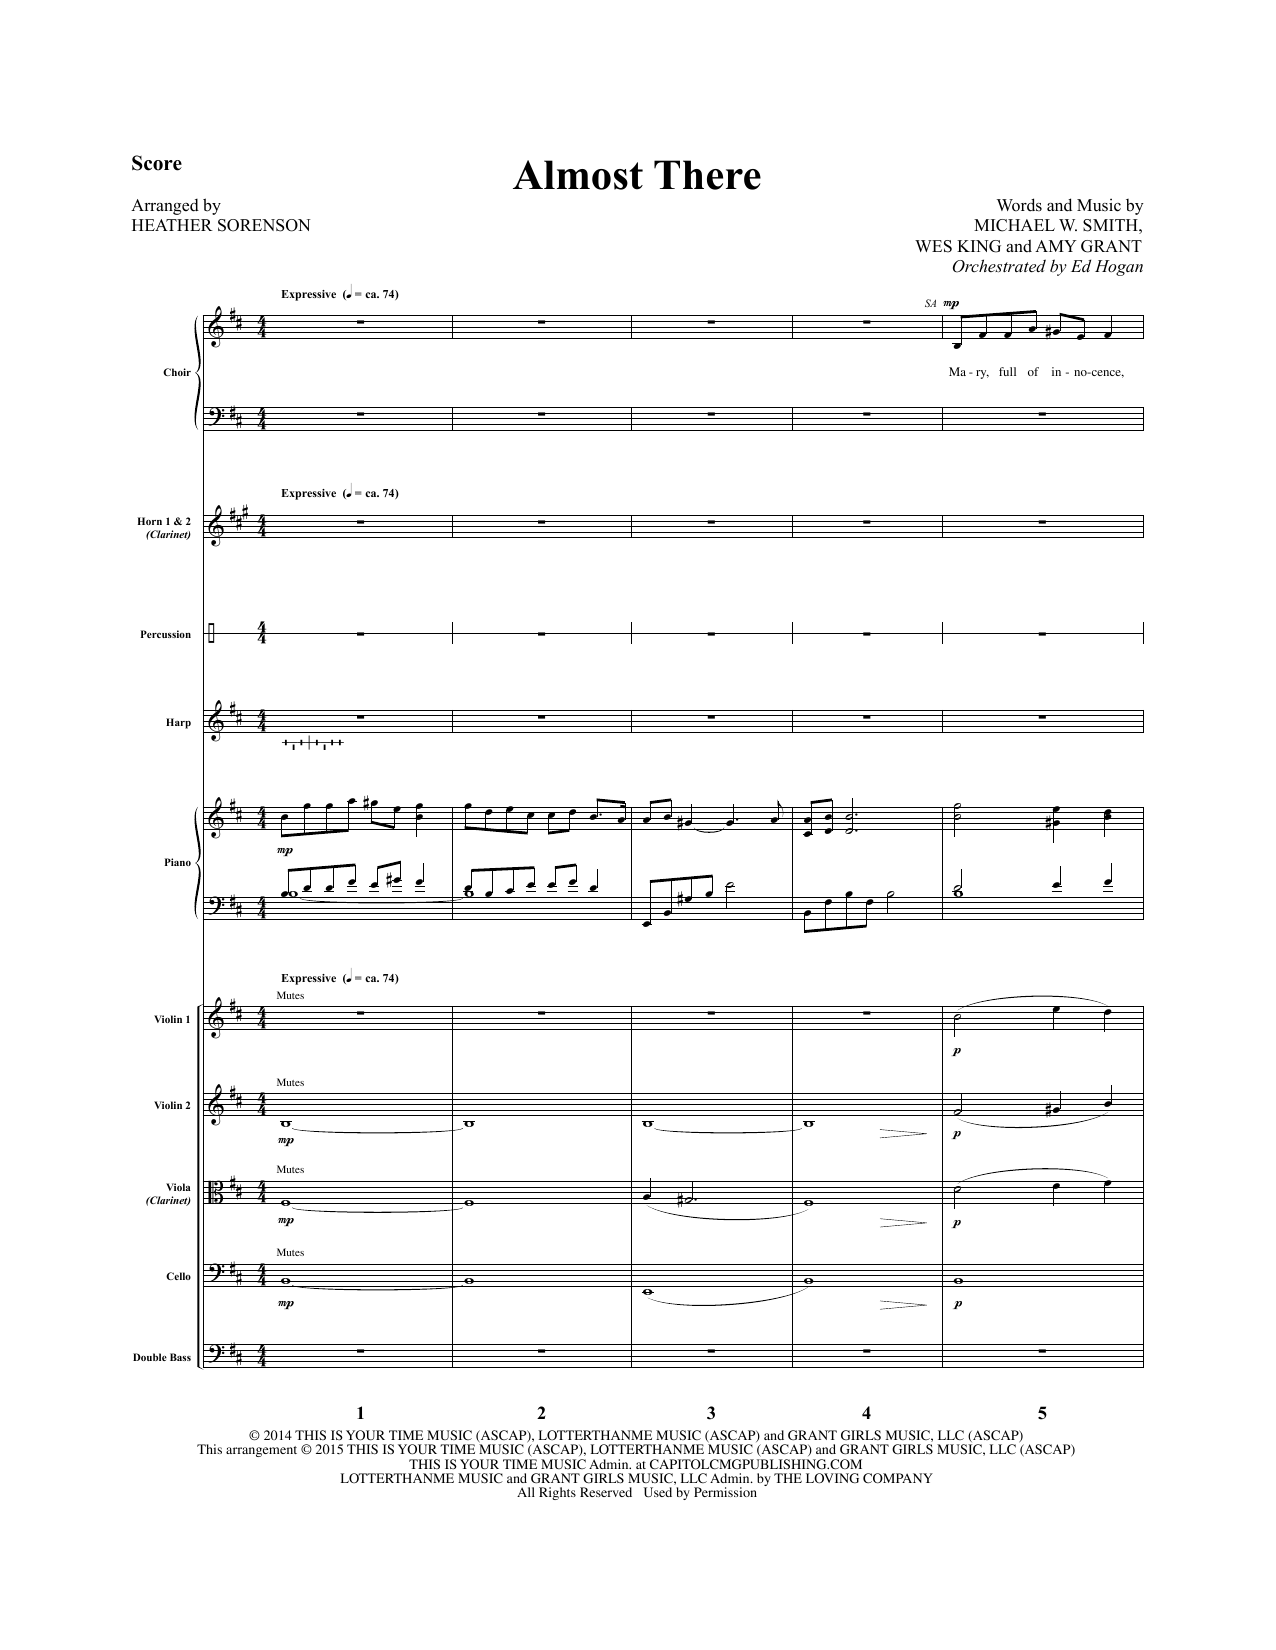 Heather Sorenson Almost There - Full Score sheet music notes and chords. Download Printable PDF.